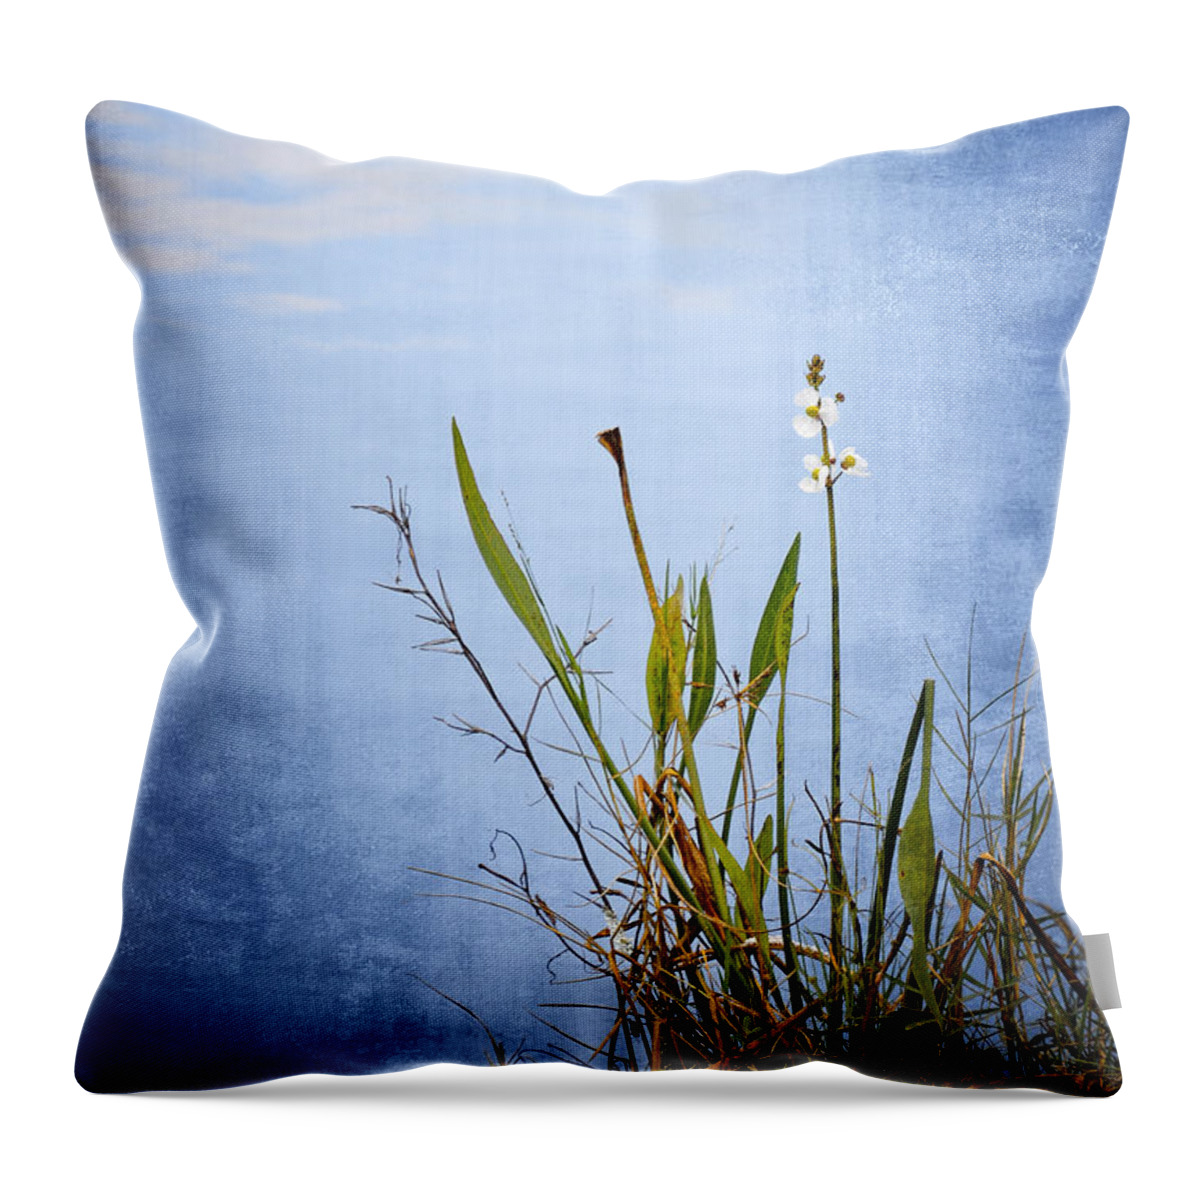 Wildflower Throw Pillow featuring the photograph Riverbank Beauty by Carolyn Marshall